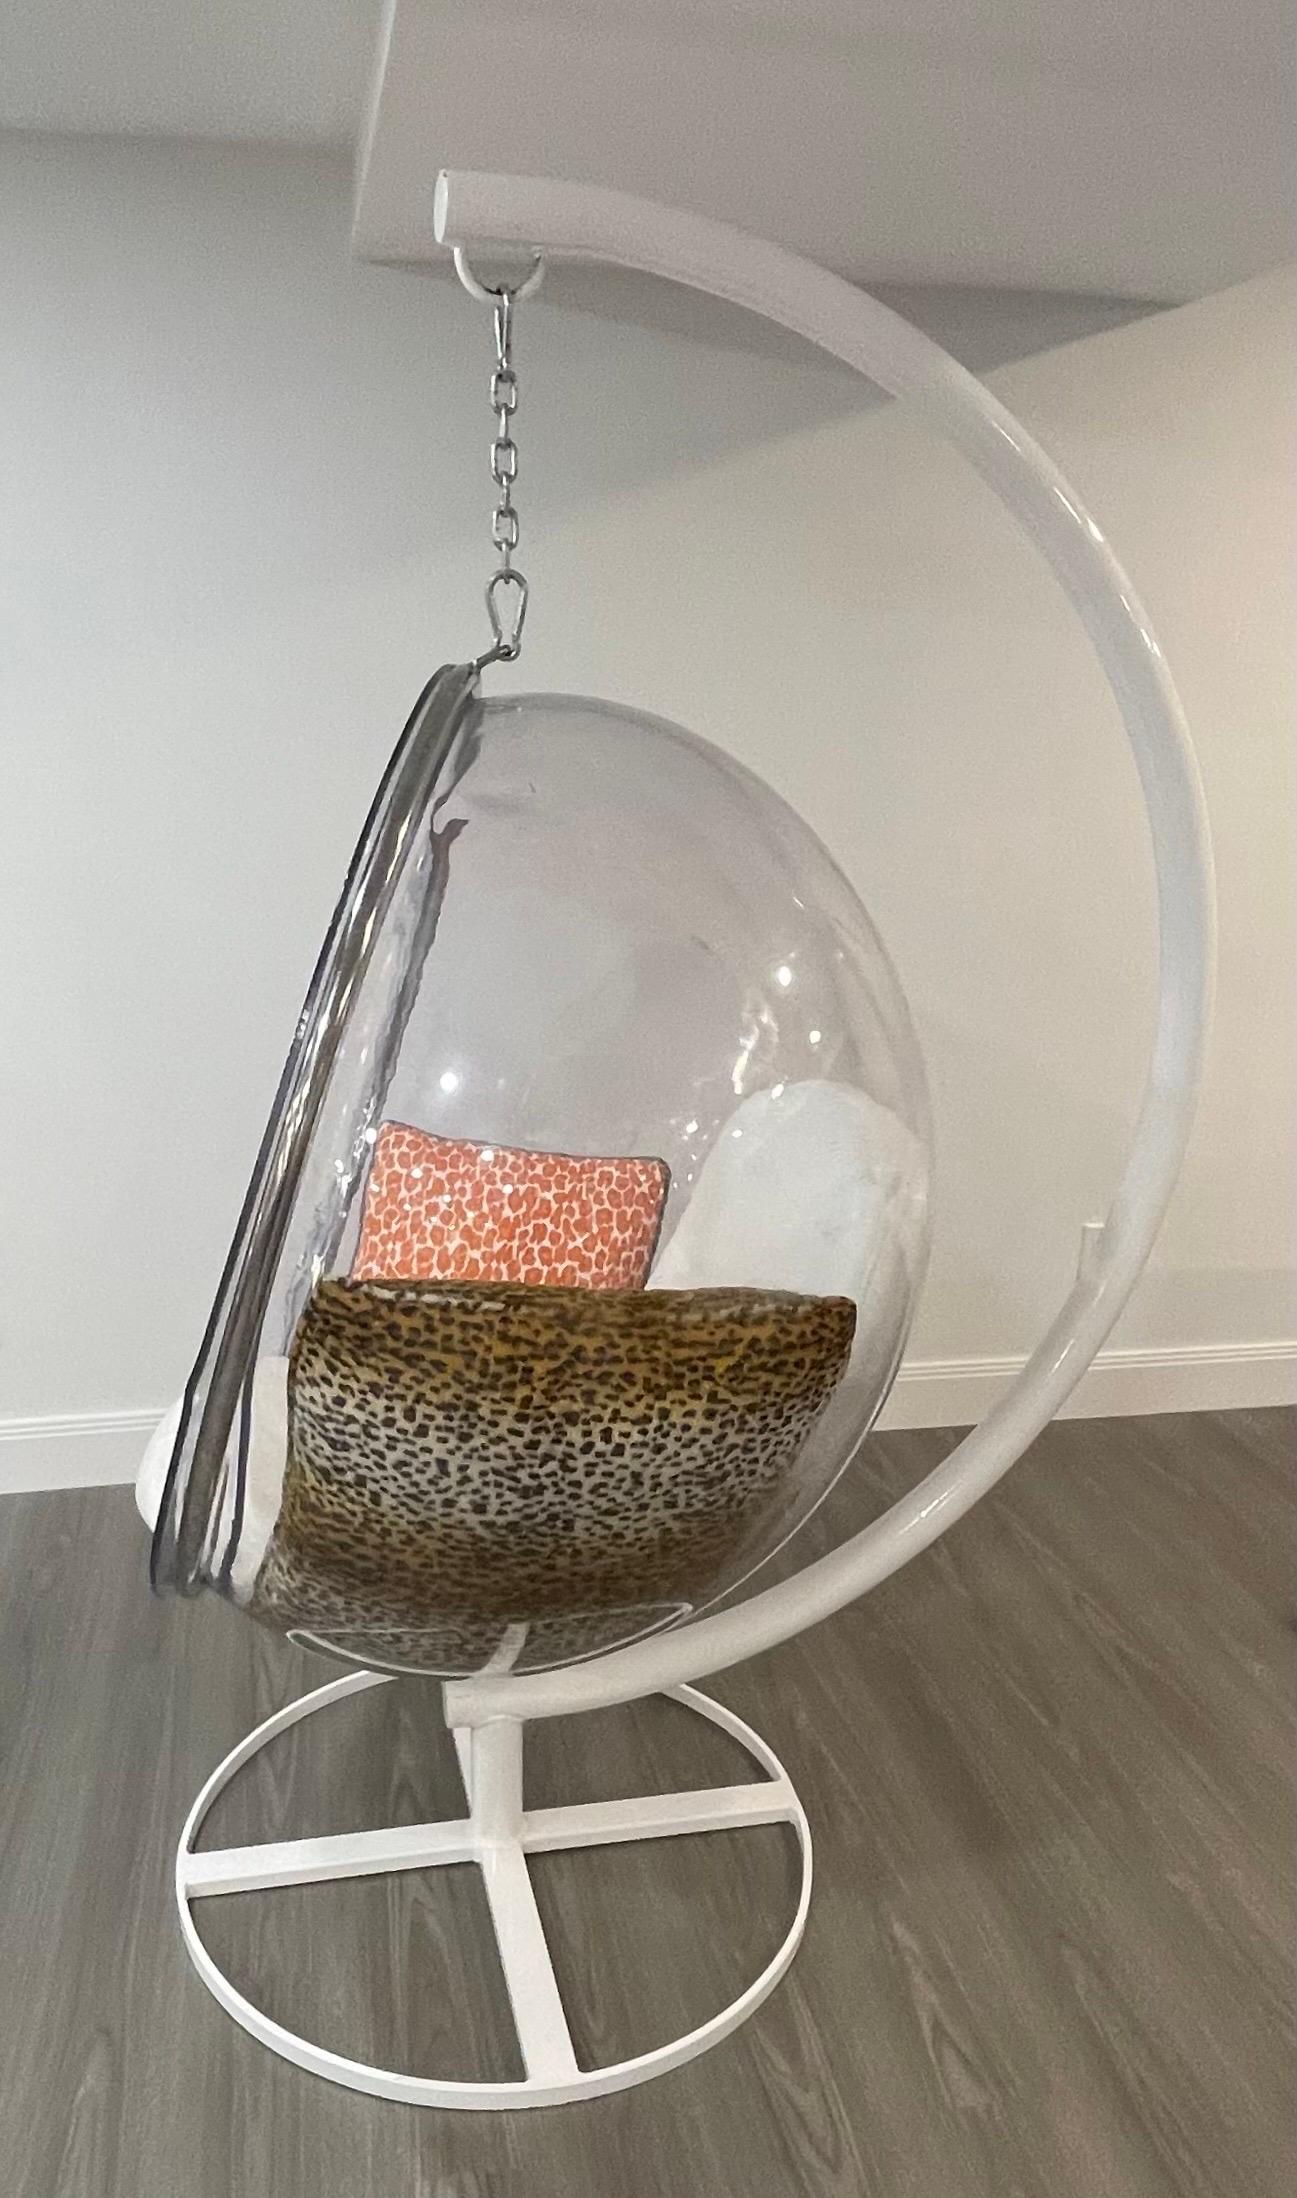 Vintage Eero Aarnio Suspended Lucite Bubble Chair White Powder Coated Stand In Good Condition For Sale In Roslyn, NY